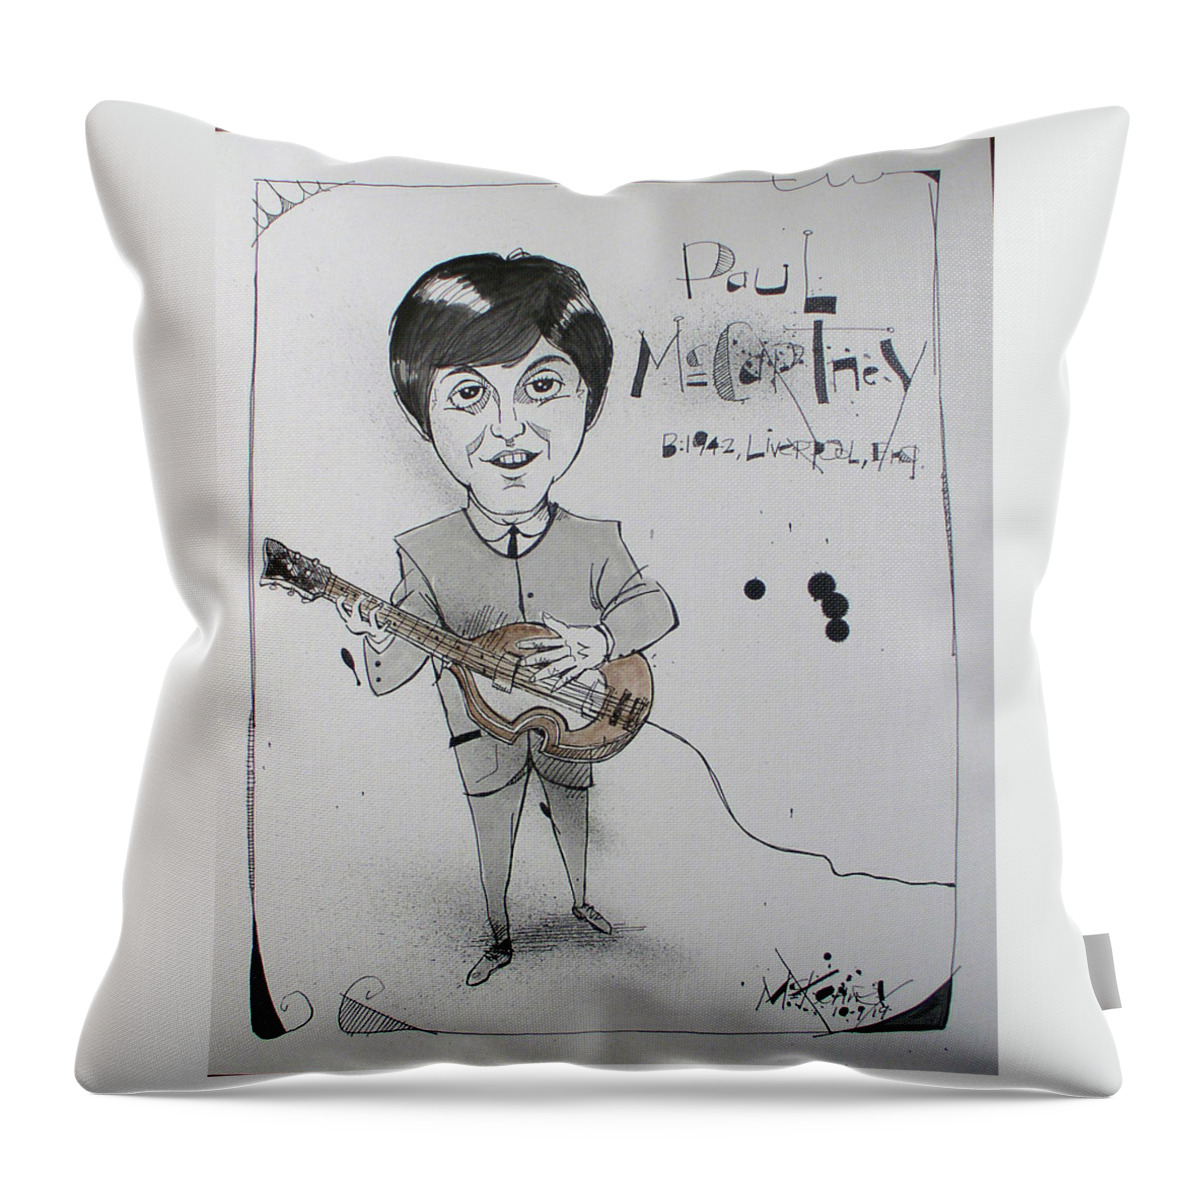  Throw Pillow featuring the drawing McCartney by Phil Mckenney